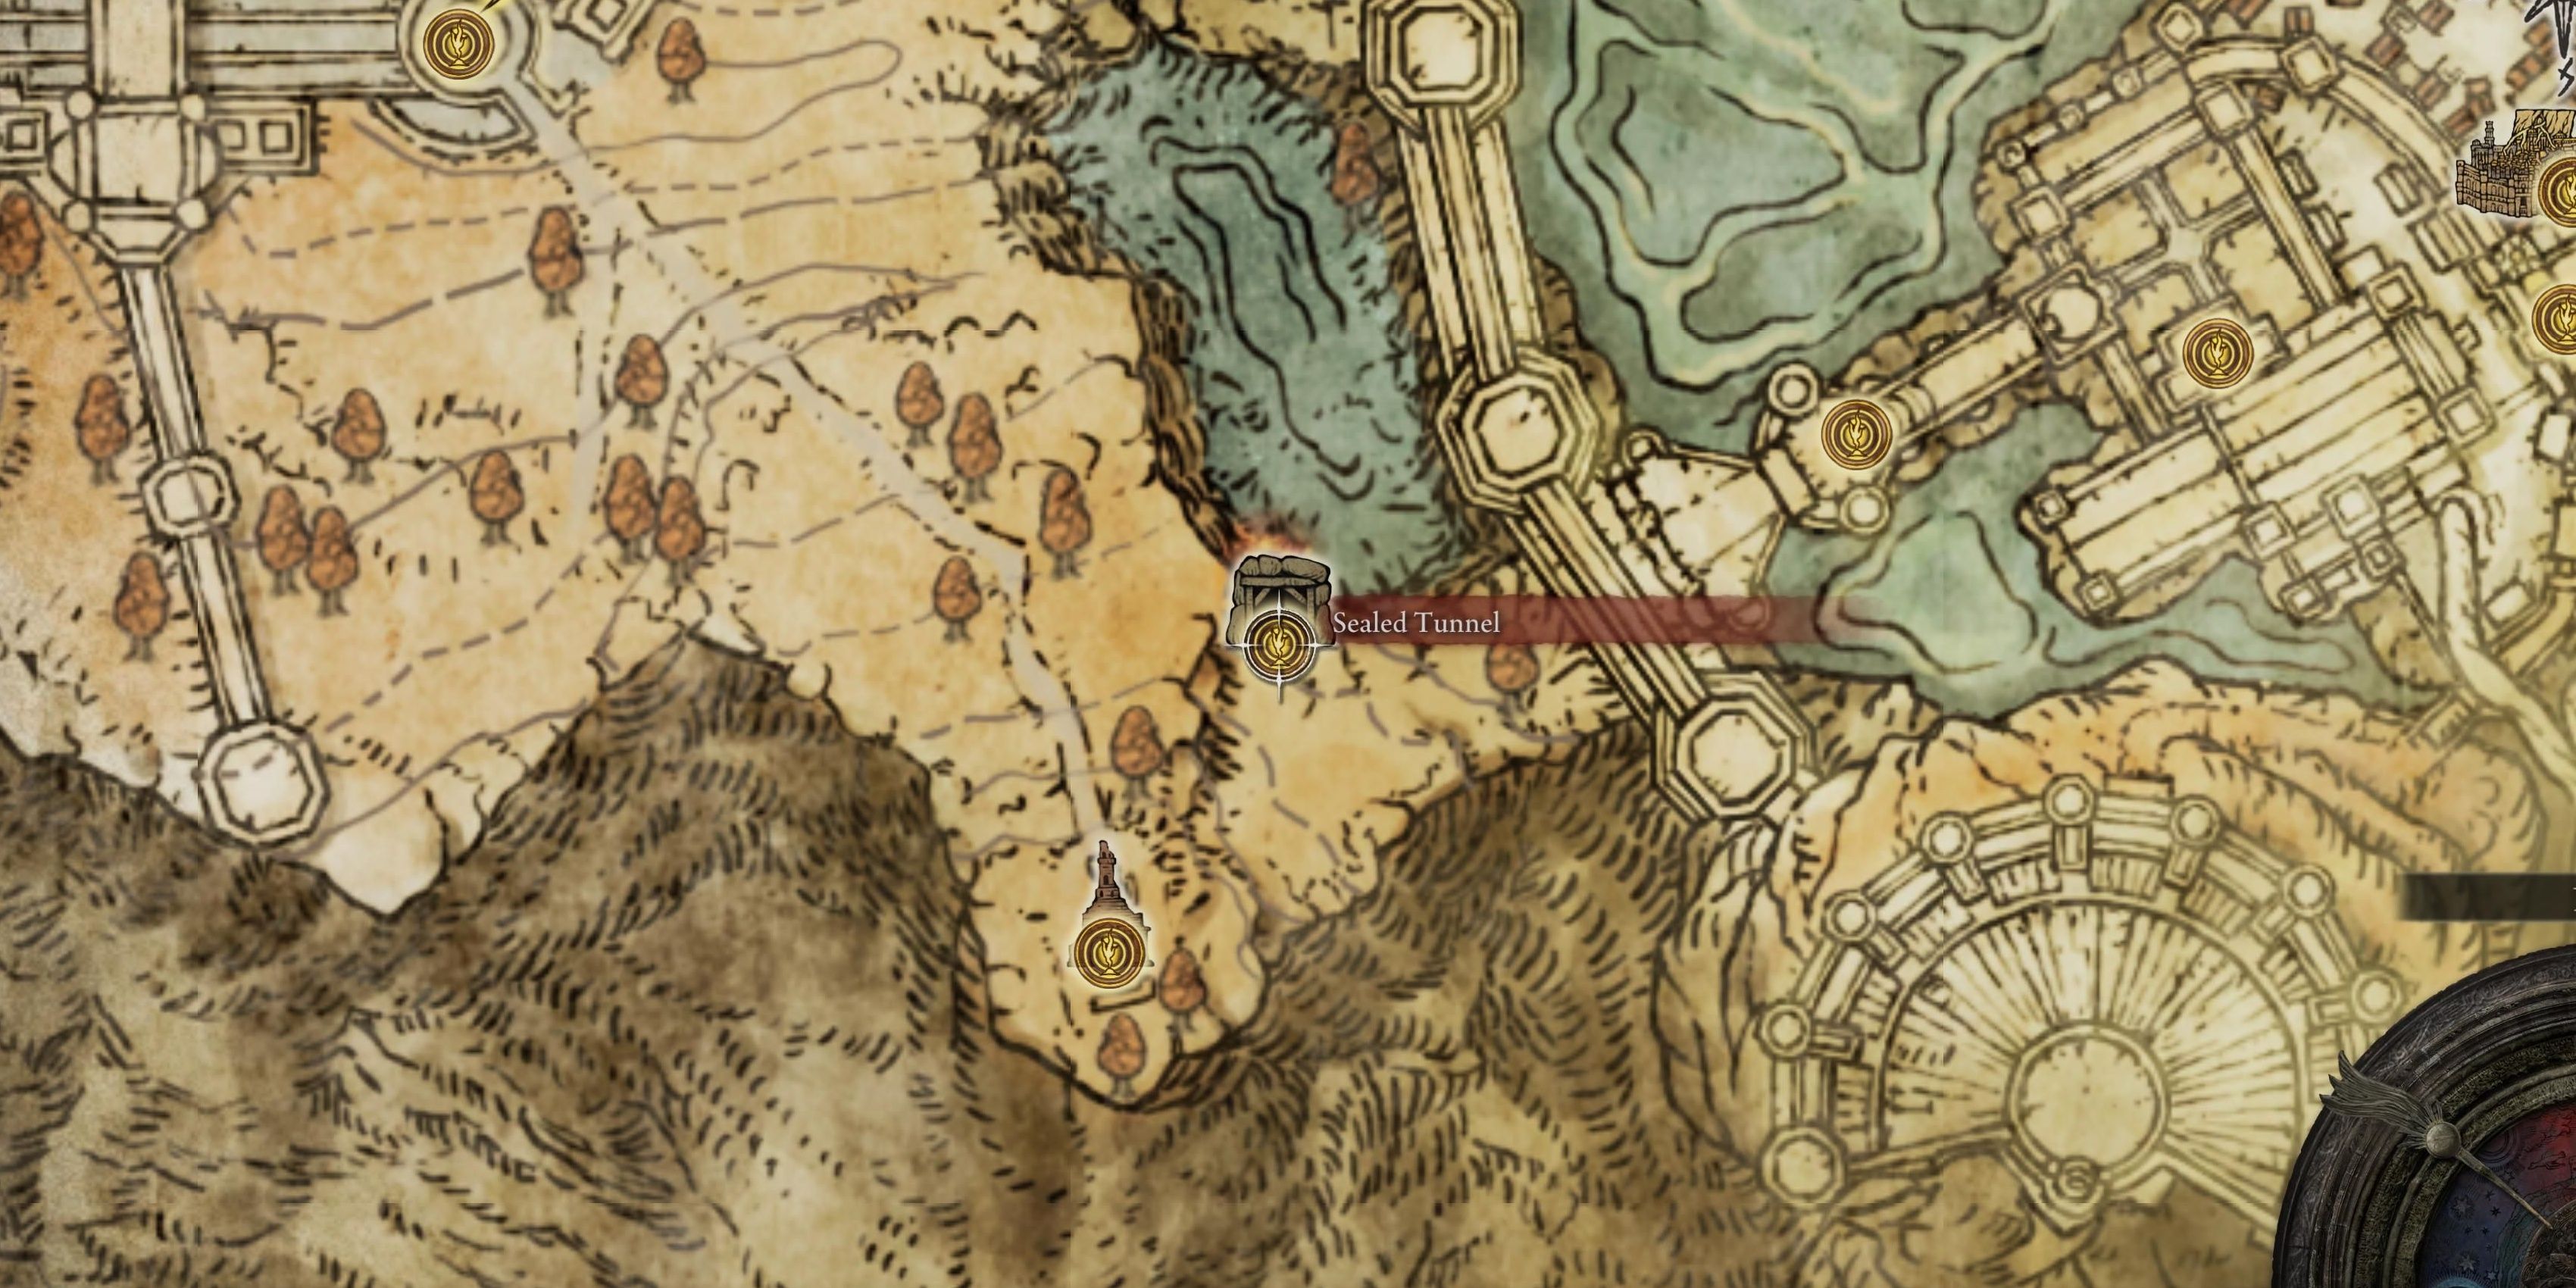 The map displaying the location of the Sealed Tunnel in Elden Ring.